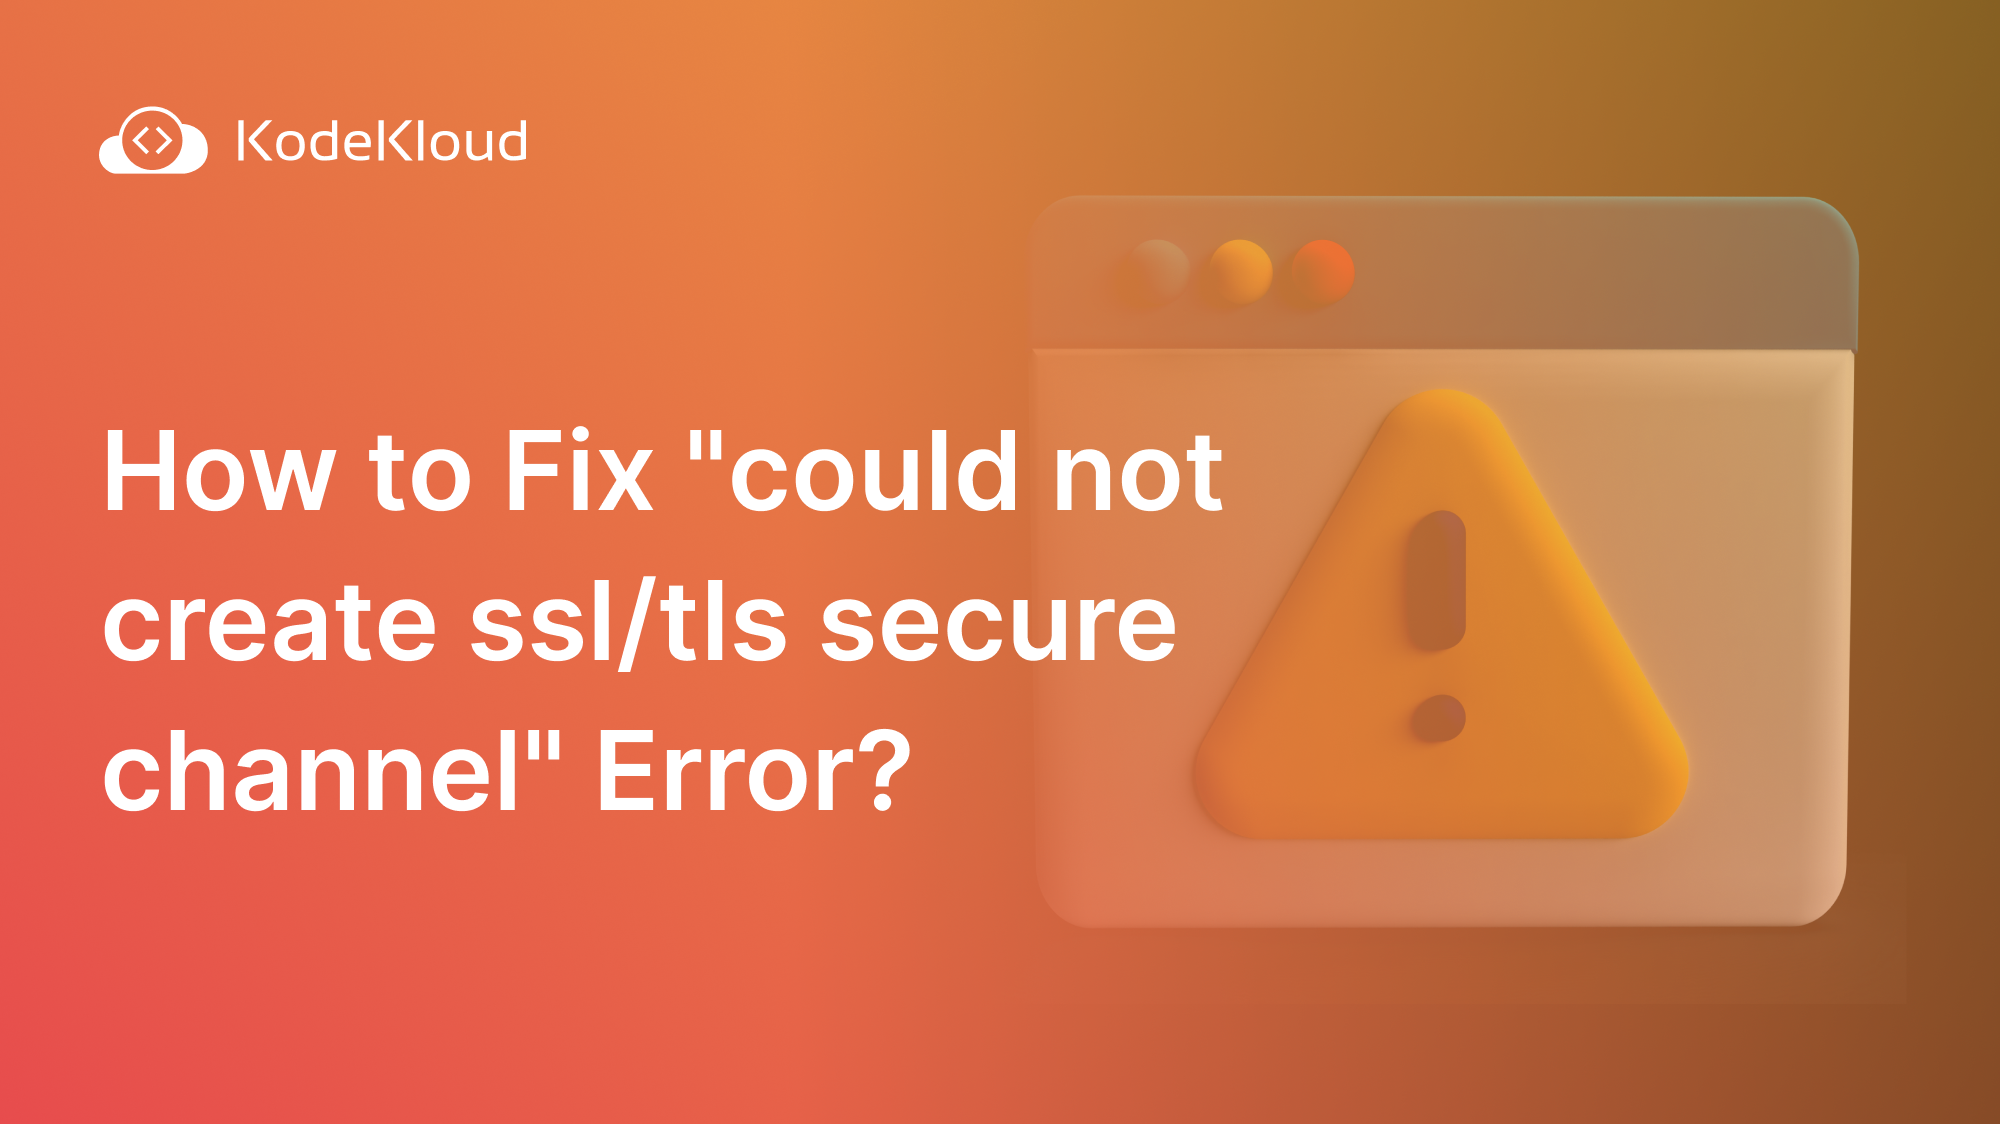 How to Fix “Could not create SSL/TLS secure channel” Error